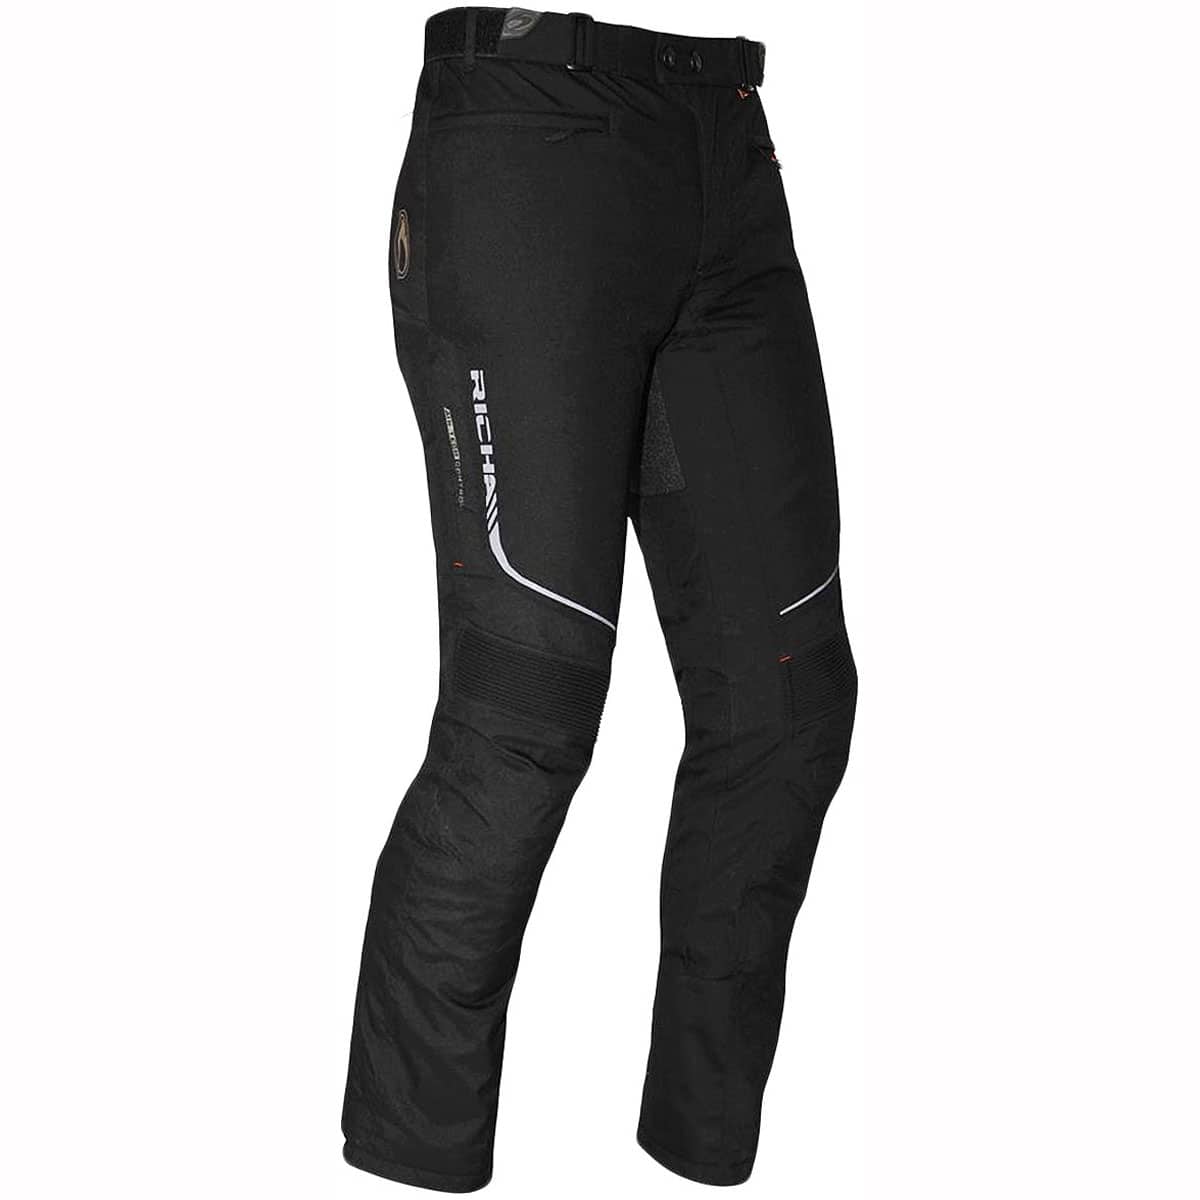 Waterproof ladies textile motorcycle trousers from Richa with D3O armour - front